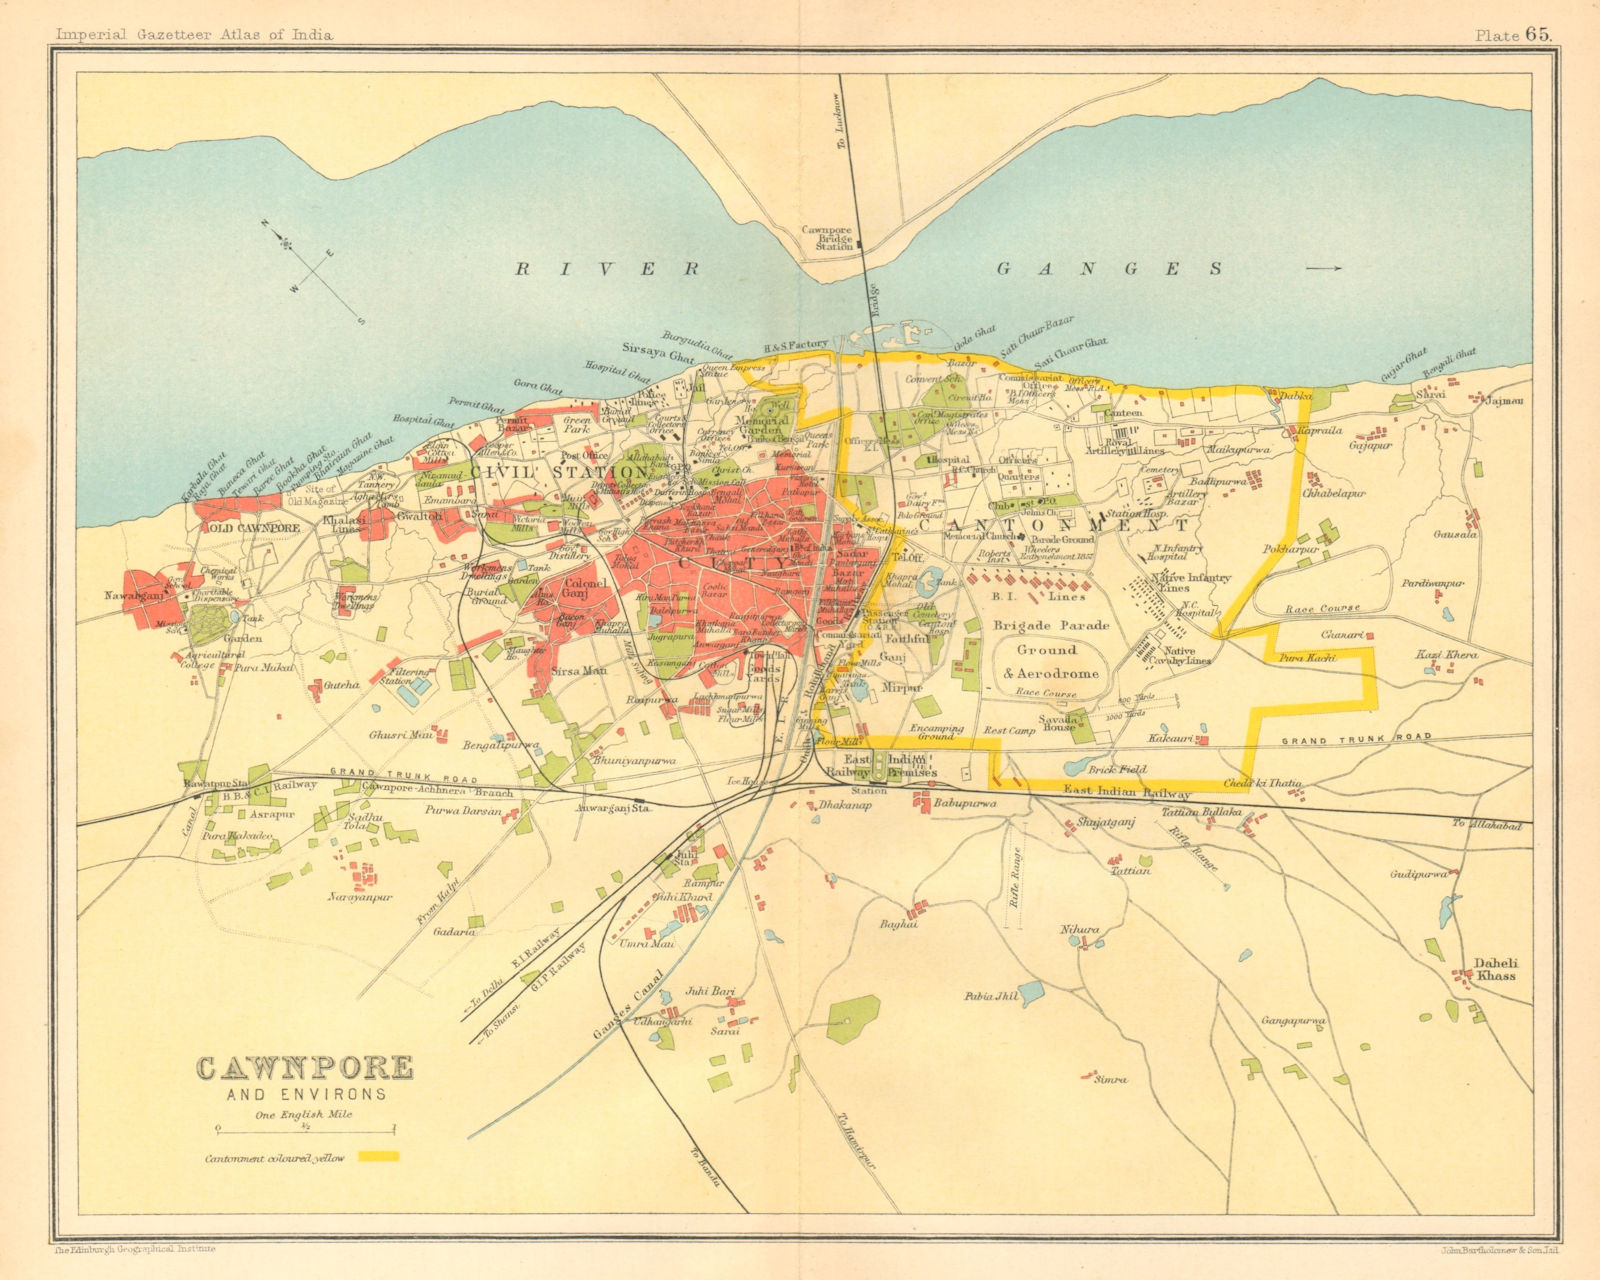 Associate Product Cawnpore/Kanpur town city plan. Key buildings Cantonment. British India 1931 map